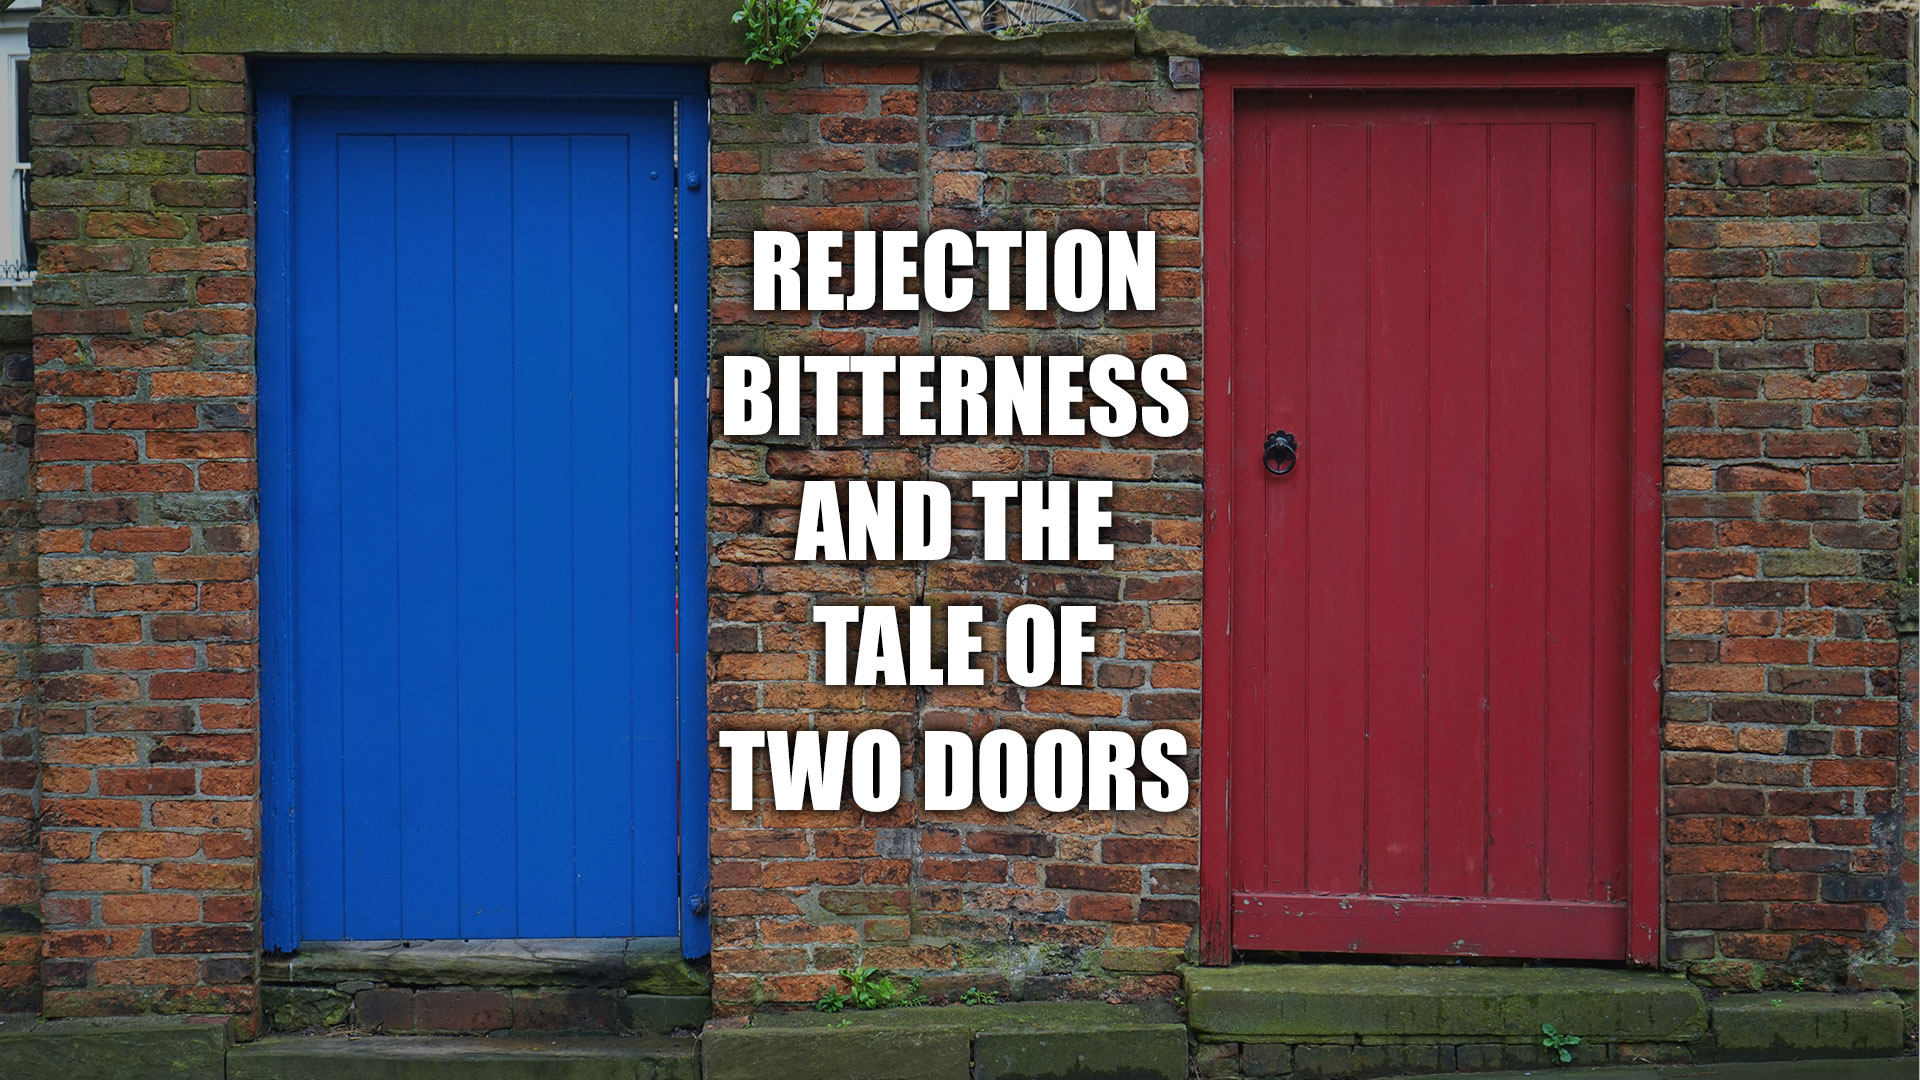 Rejection, Bitterness, and the Tale of Two Doors